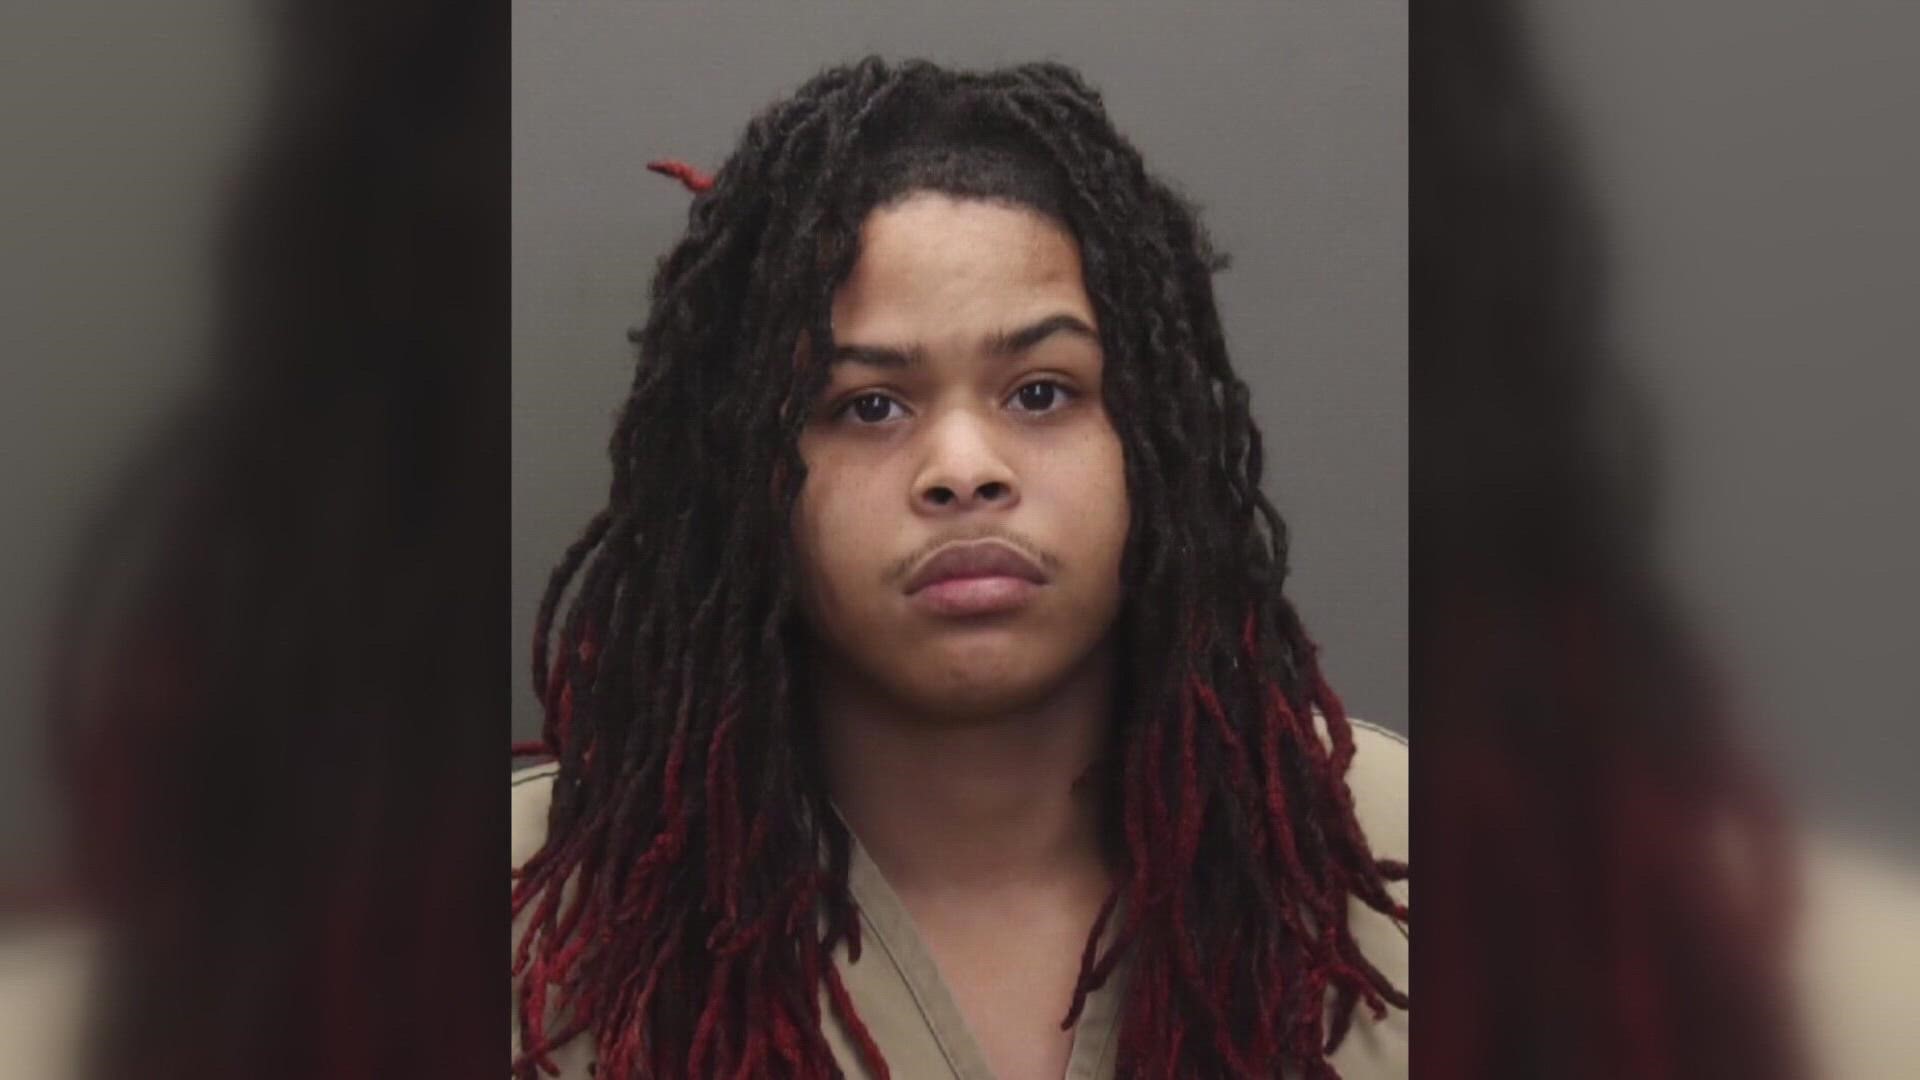 The Columbus Division of Police said on Friday murder charges against David Johnson III and Caiden Allen were dropped. Johnson remains in jail on previous warrants.